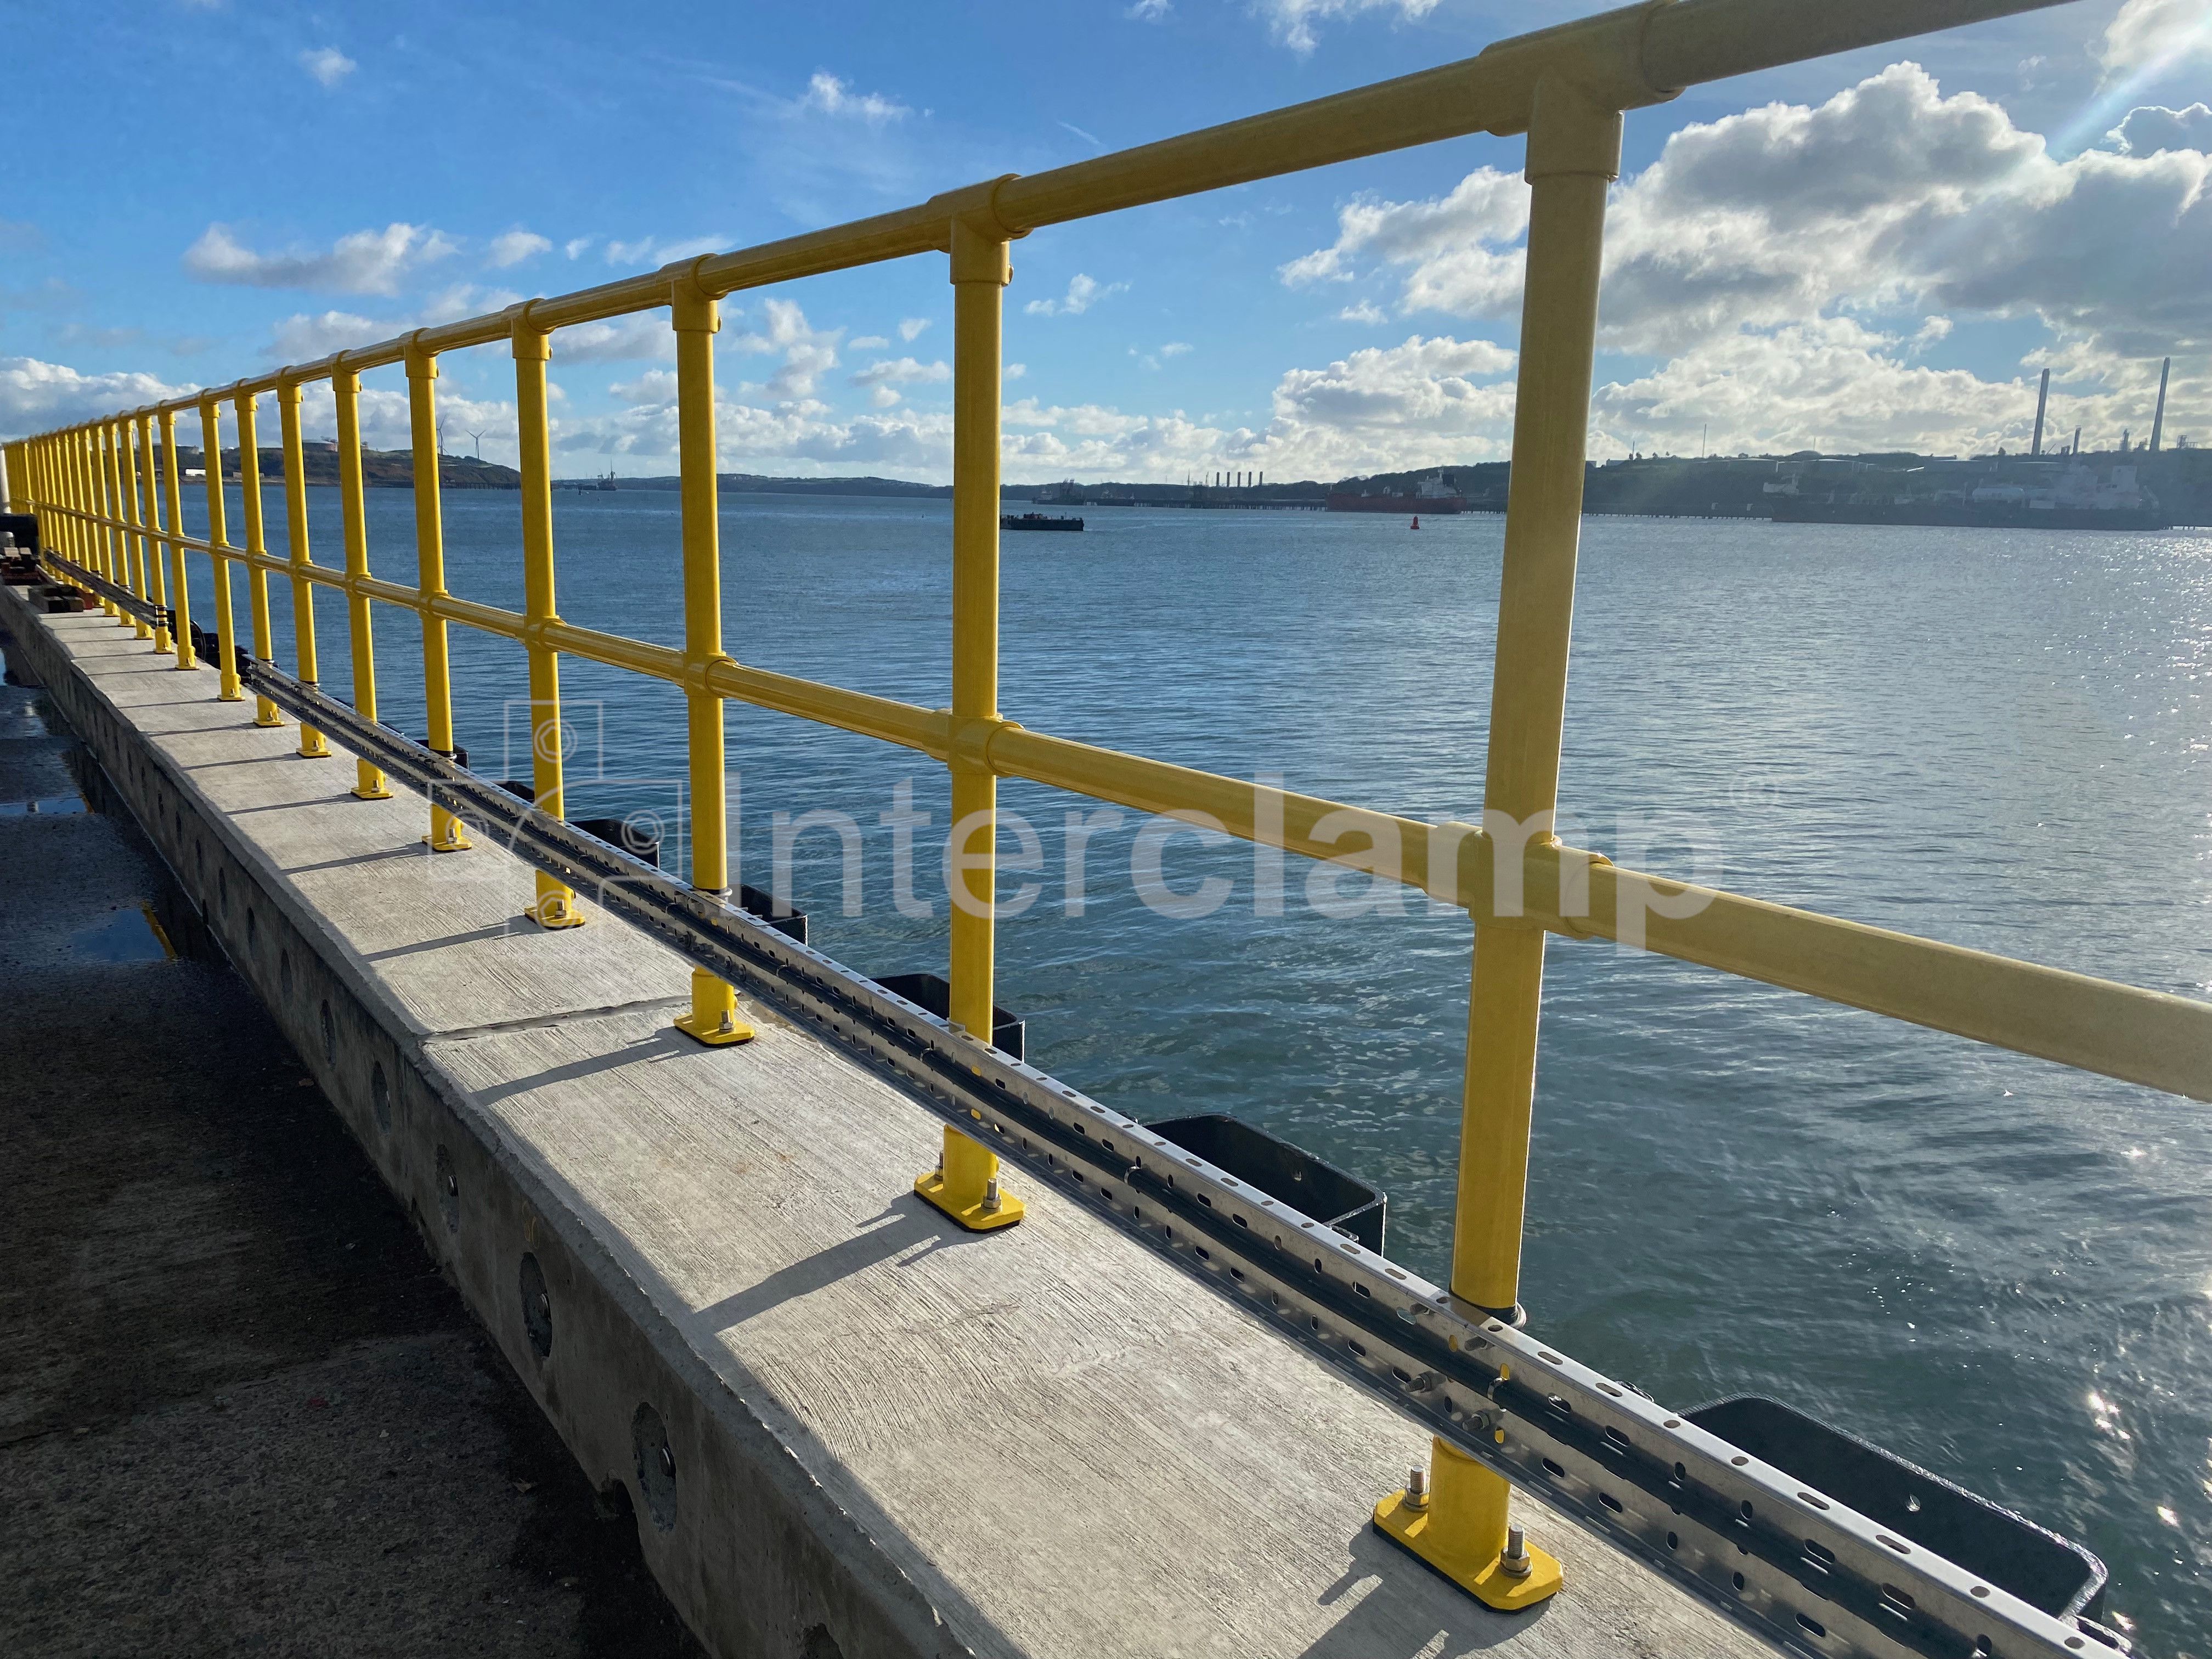 Interclamp key clamp double rail system, powdered coated in safety yellow.  Installed on the perimeter of a jetty.